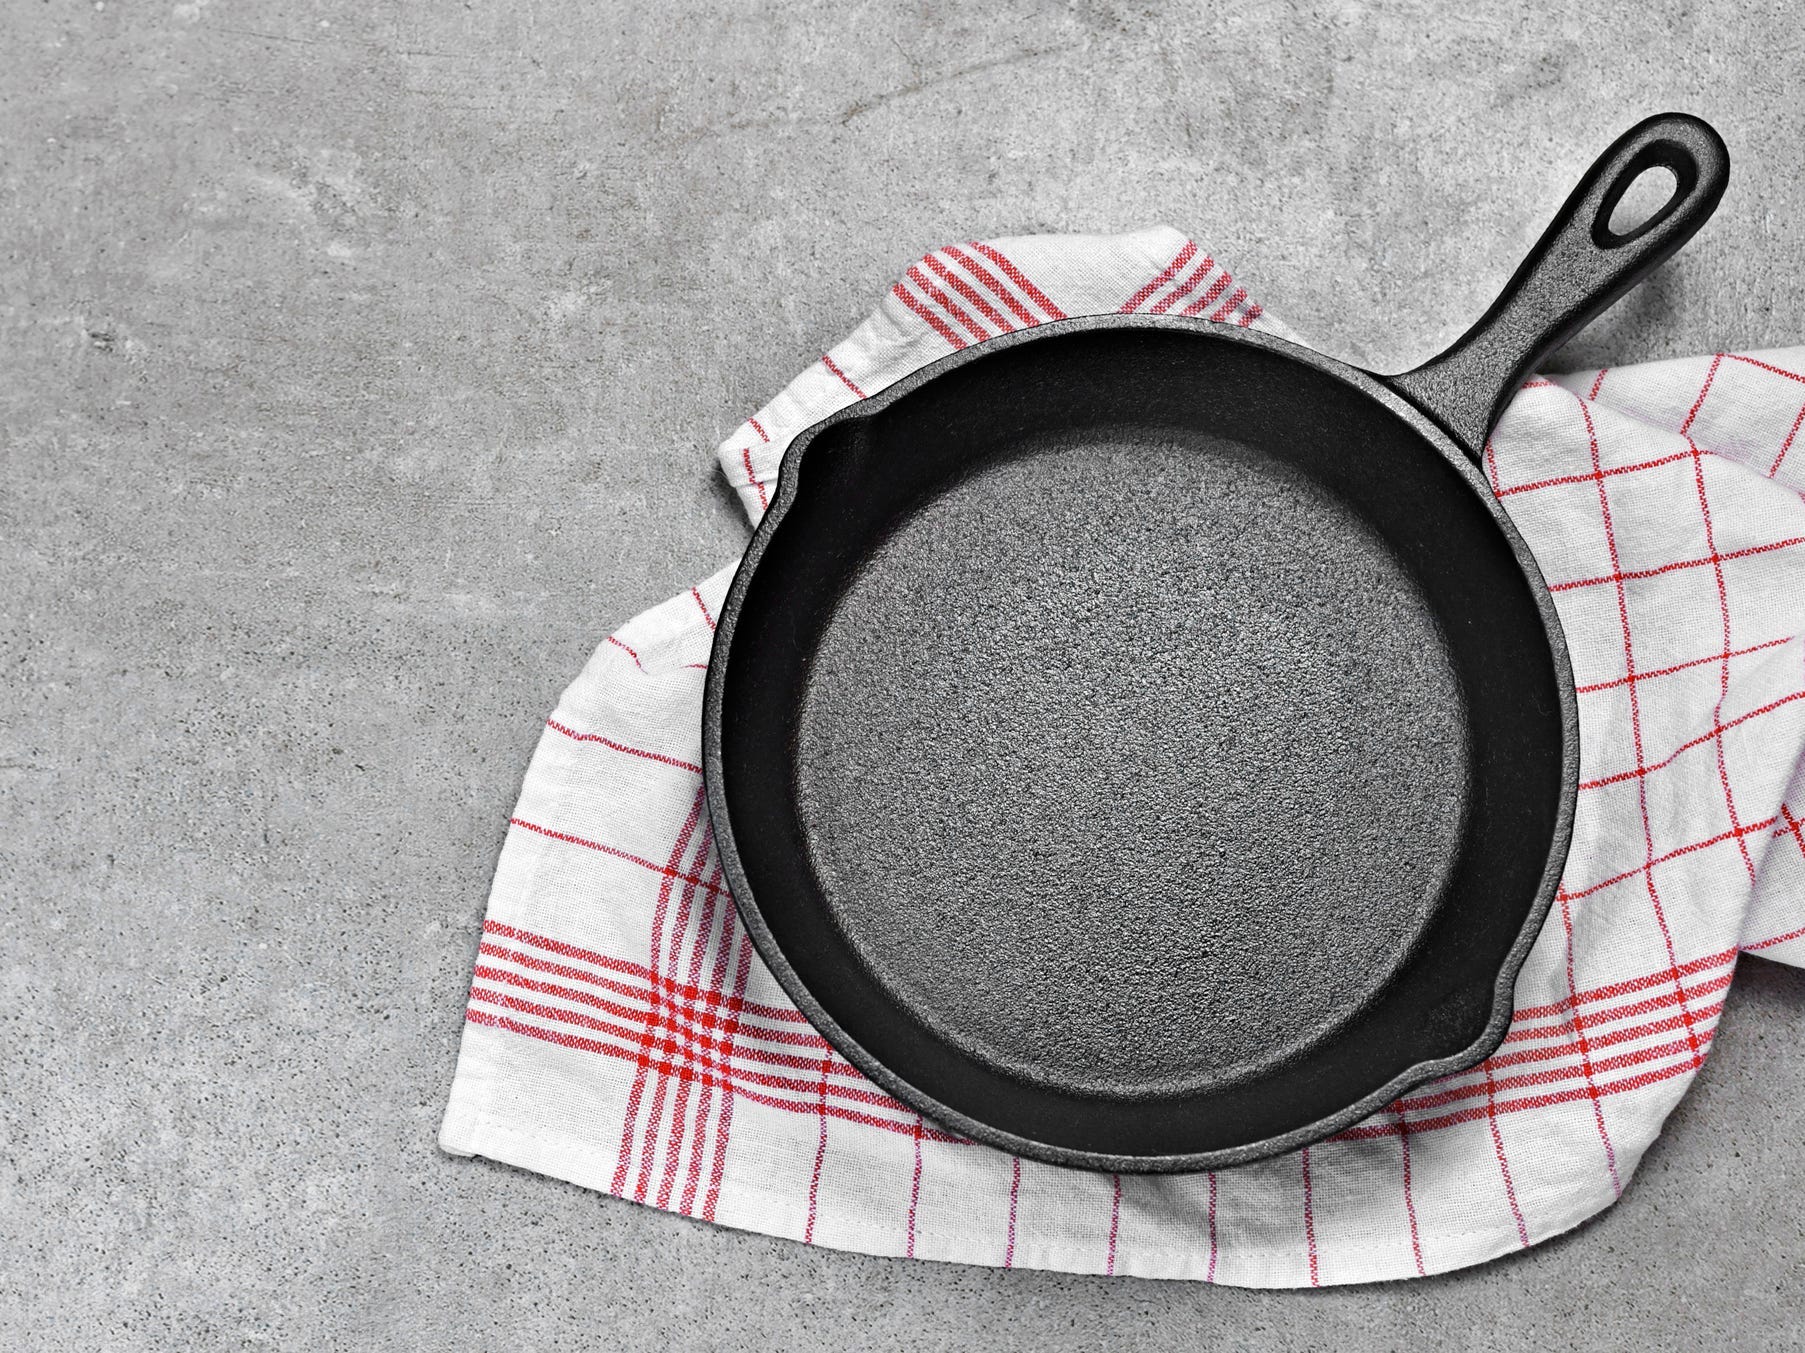 Cast iron pan on top of a towel.